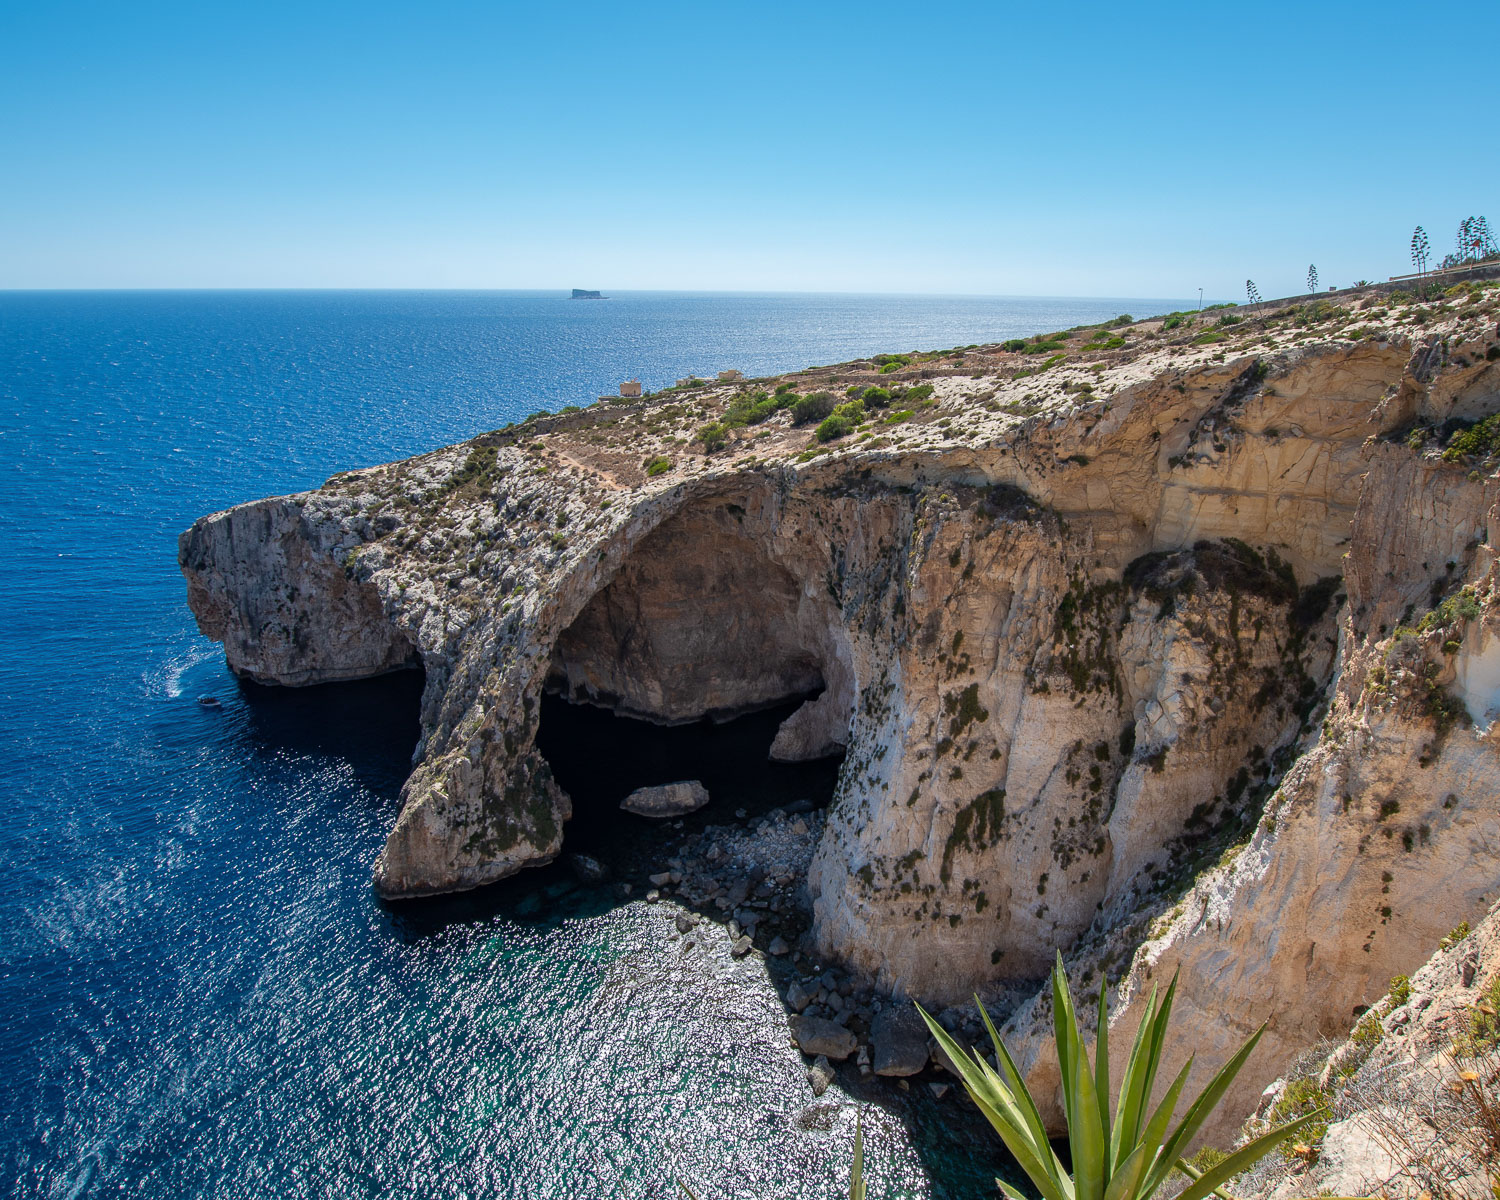 Blue Grotto Malta by ReneGossner on Pixabay